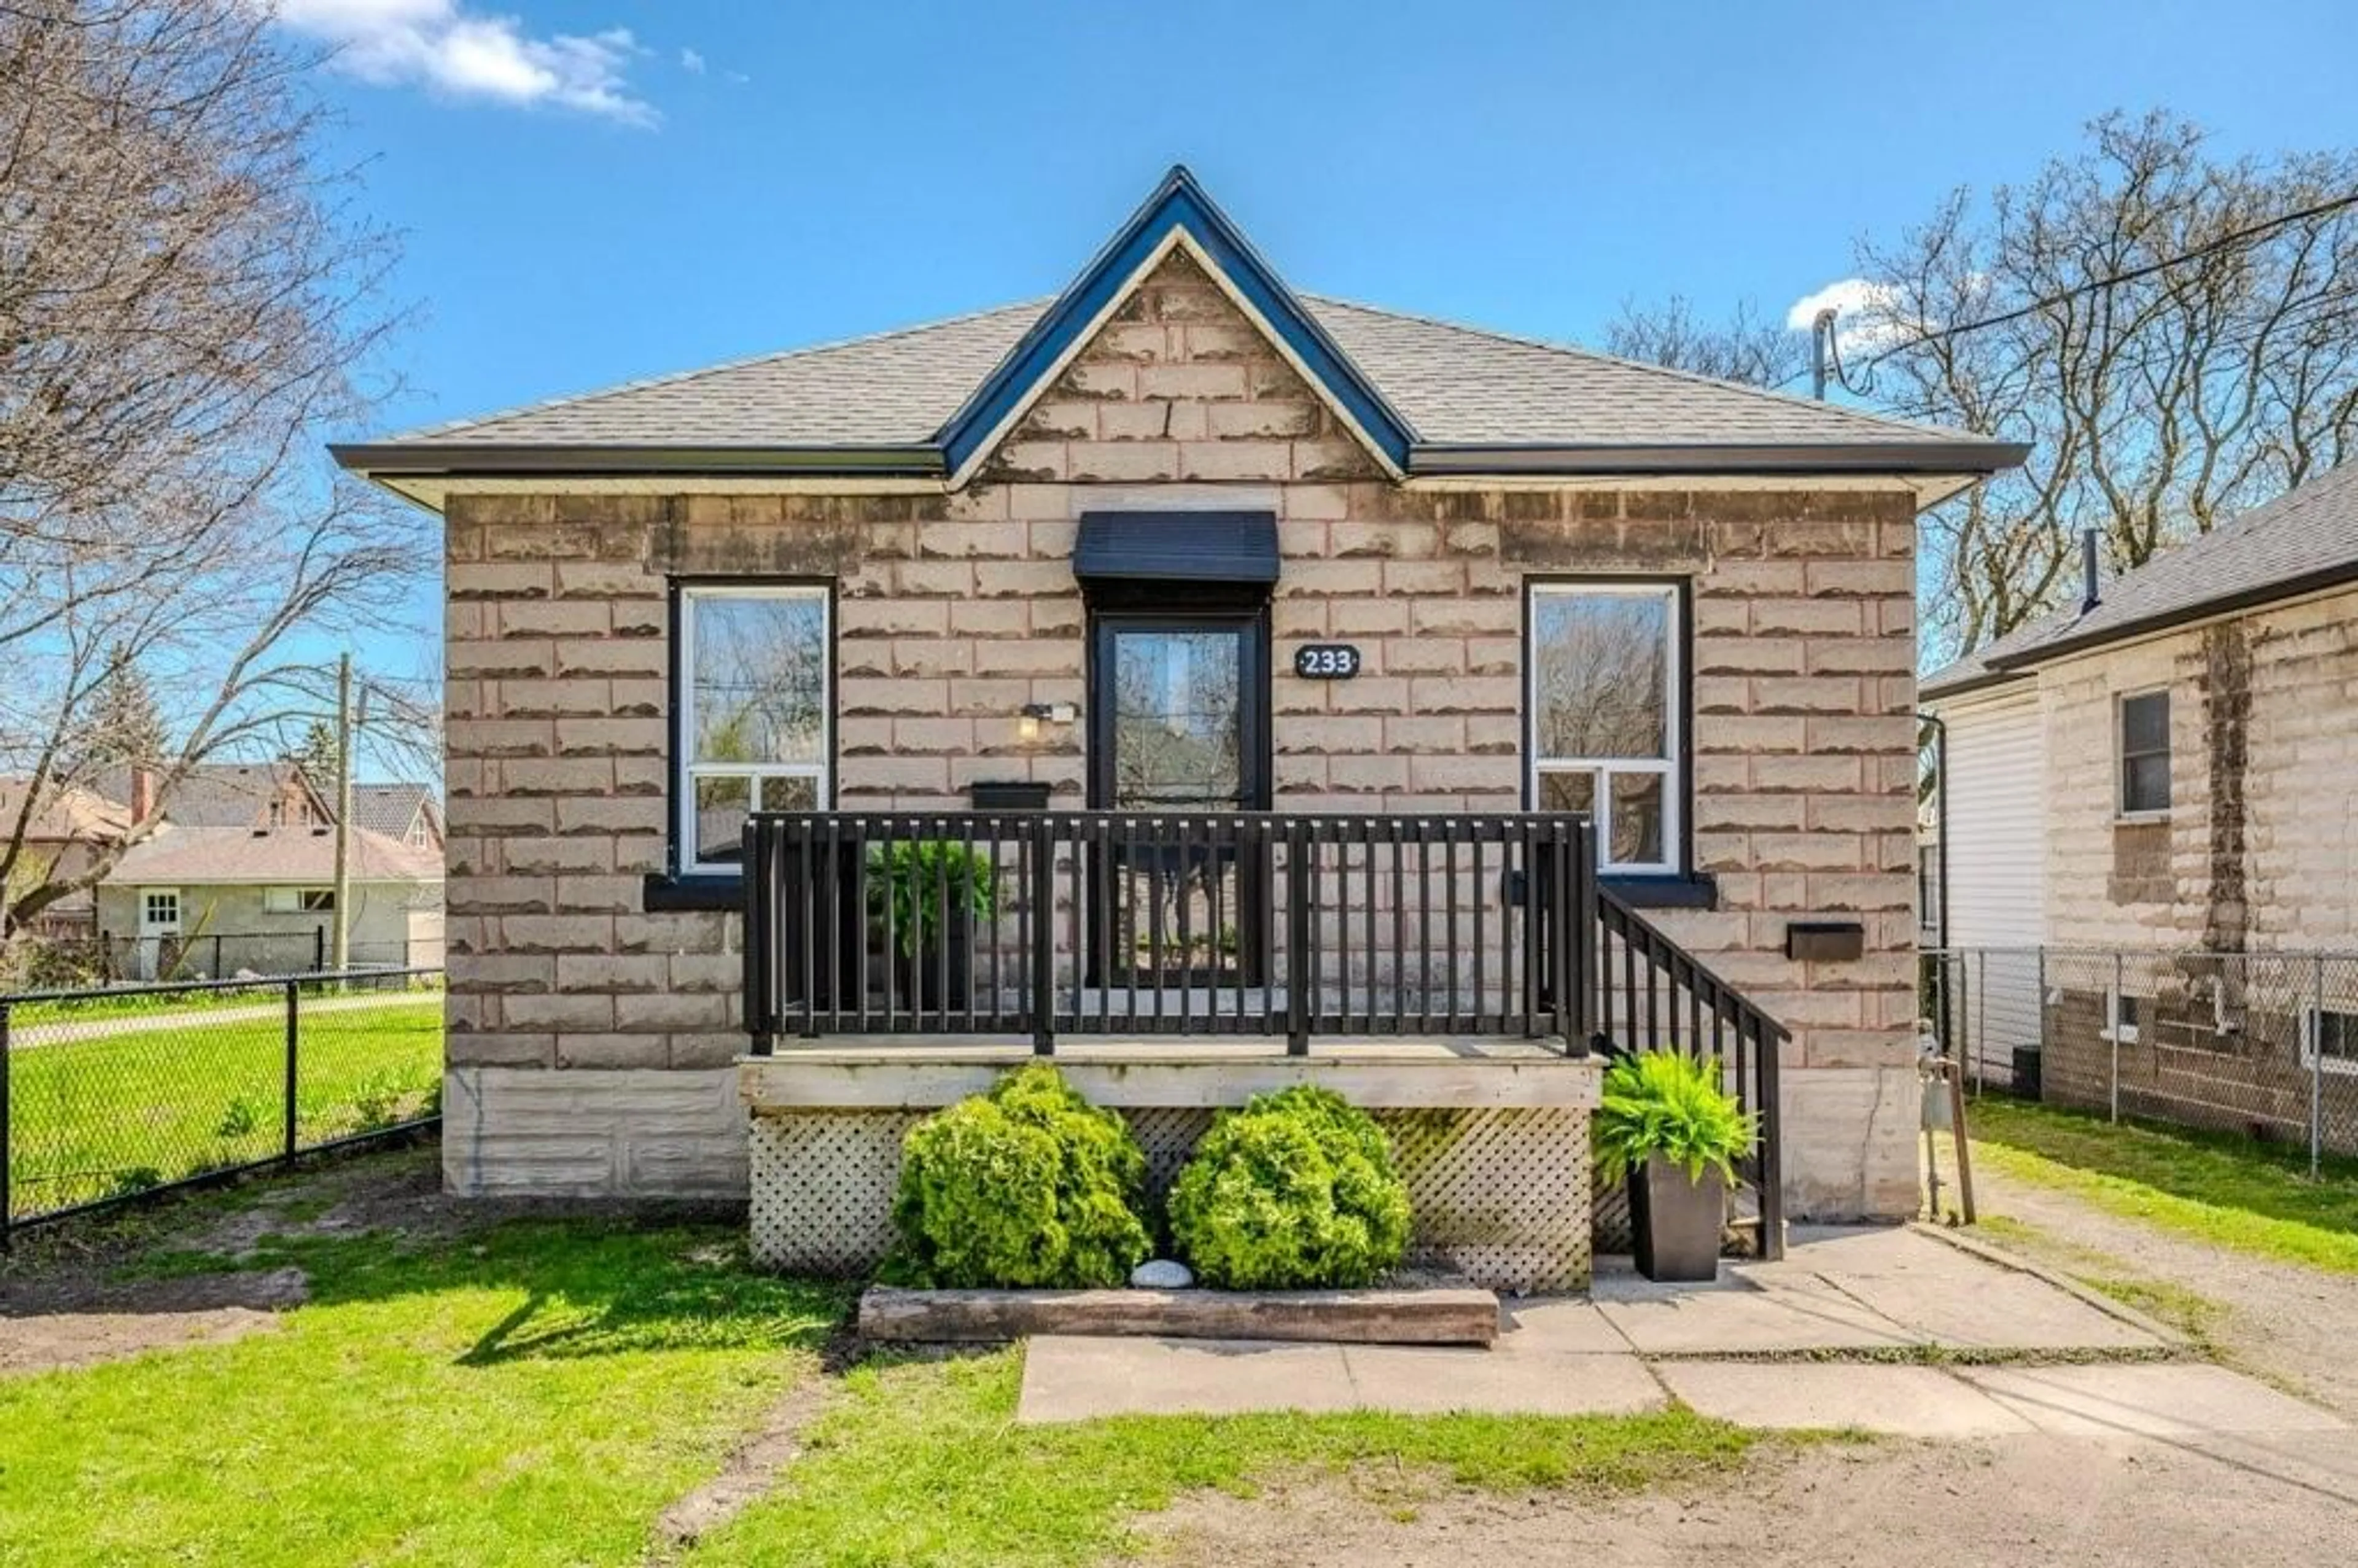 Frontside or backside of a home for 233 Elizabeth St, Guelph Ontario N1E 2X6